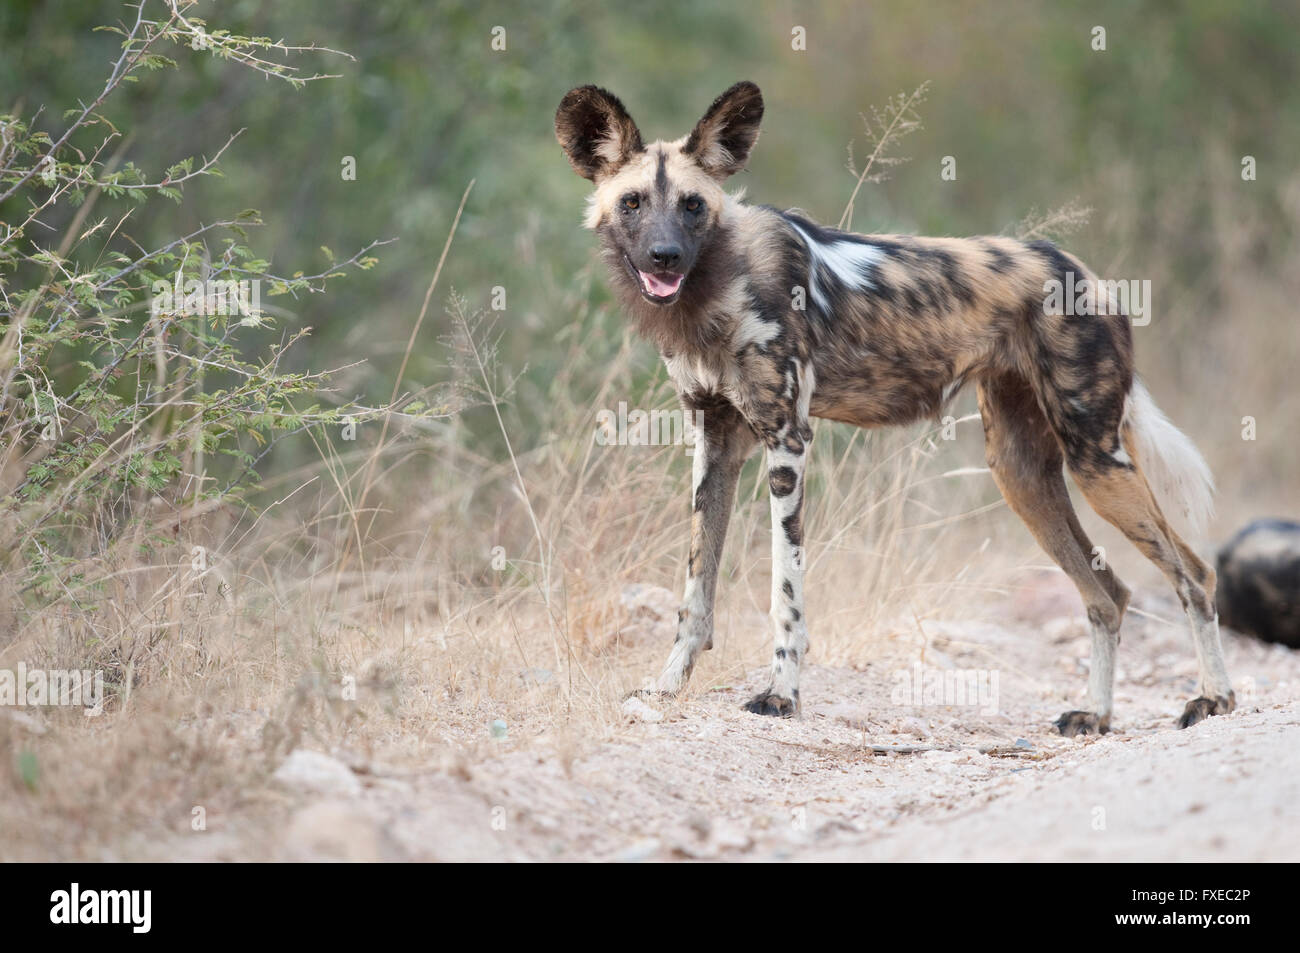 African Wild Dog (Lycaon pictus) nel Parco Nazionale di Kruger, Sud Africa Foto Stock